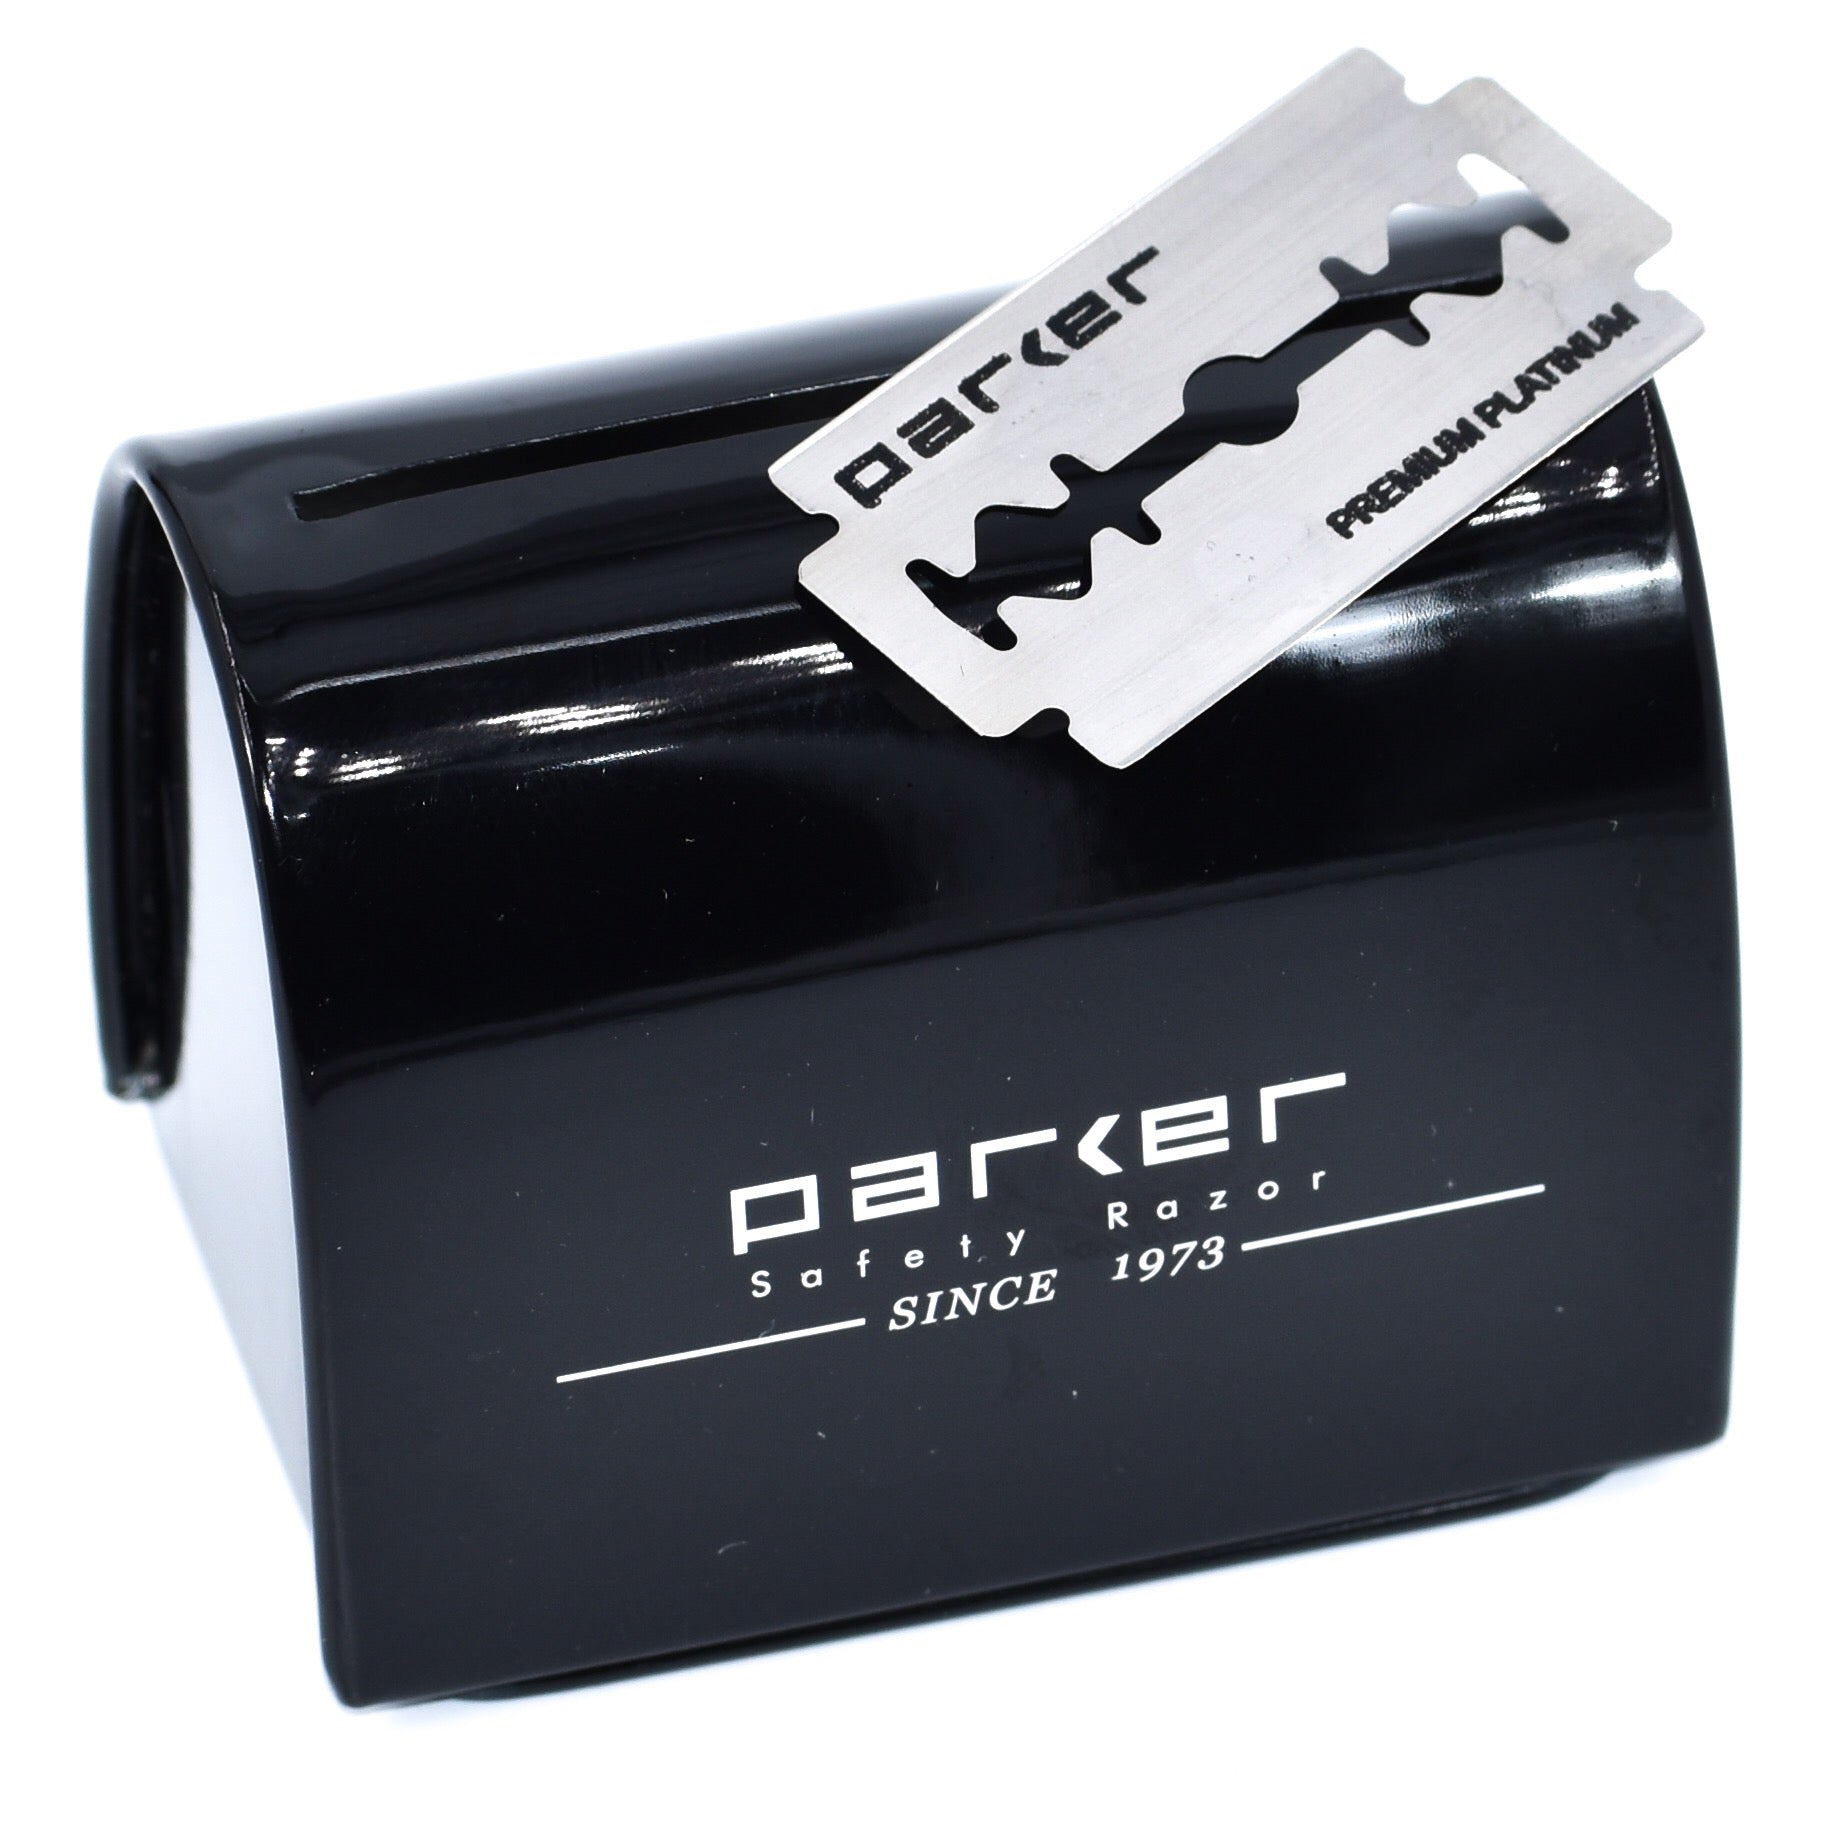 Parker Blade Disposal Bank - Cyril R. Salter | Trade Suppliers of Gentlemen's Grooming Products